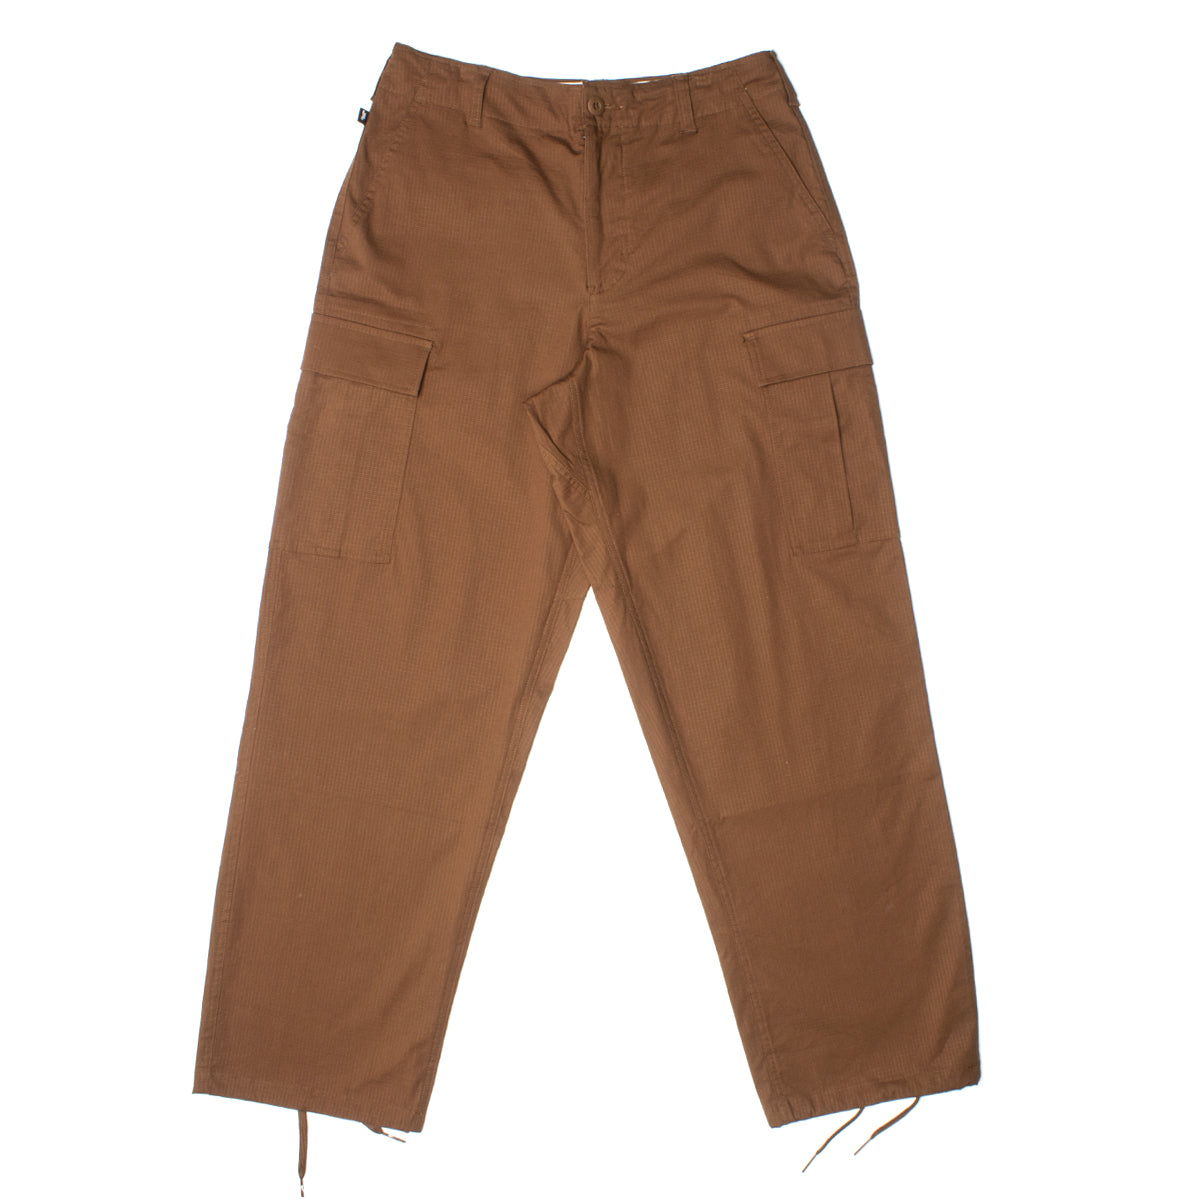 Nike SB | Kearny Cargo Pant Style # FQ0495-259 Color : Cacao Wow 